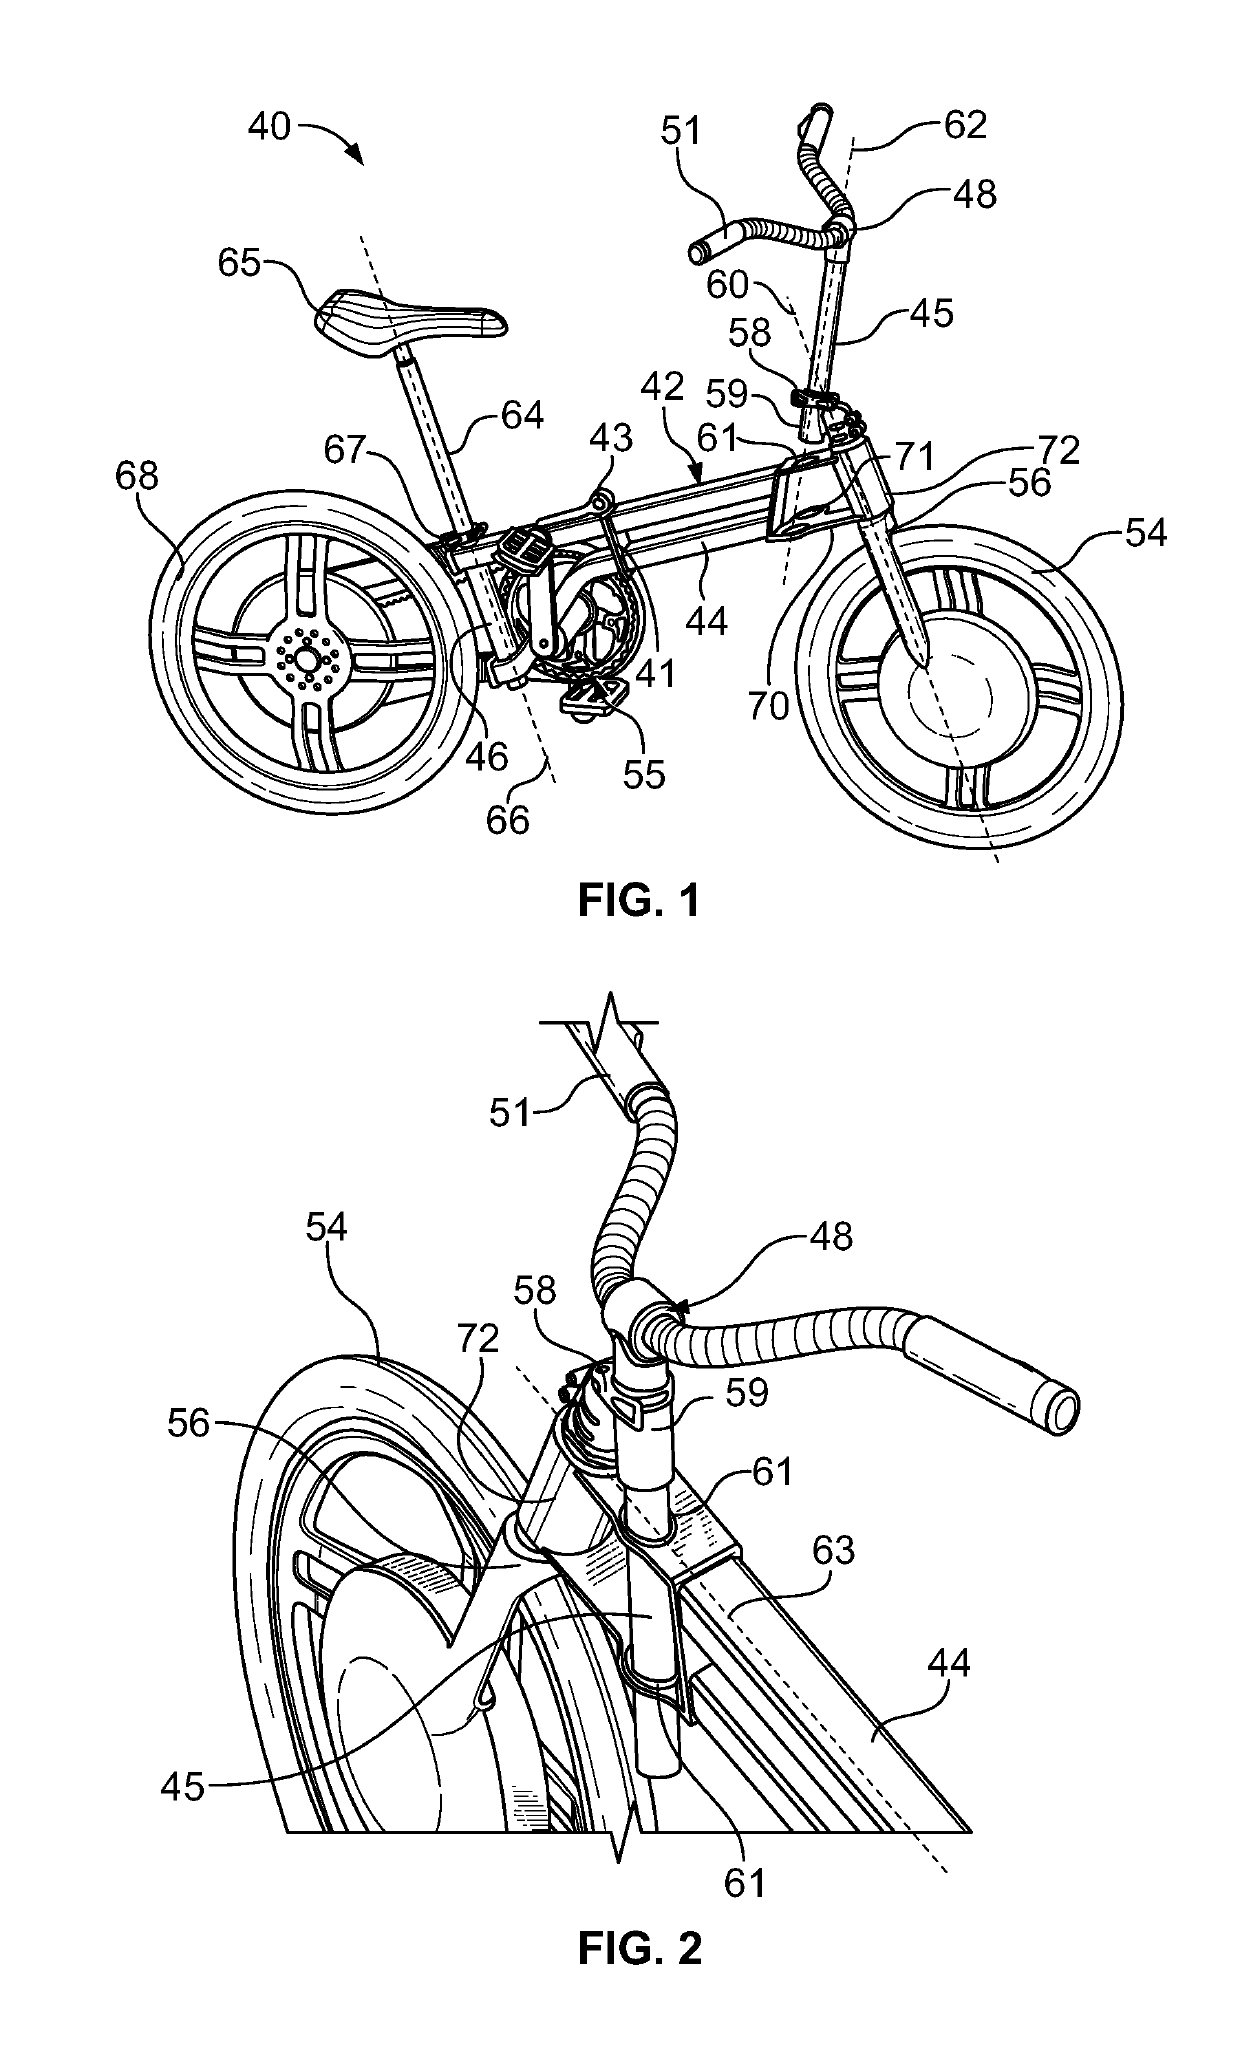 Foldable cycle assembly